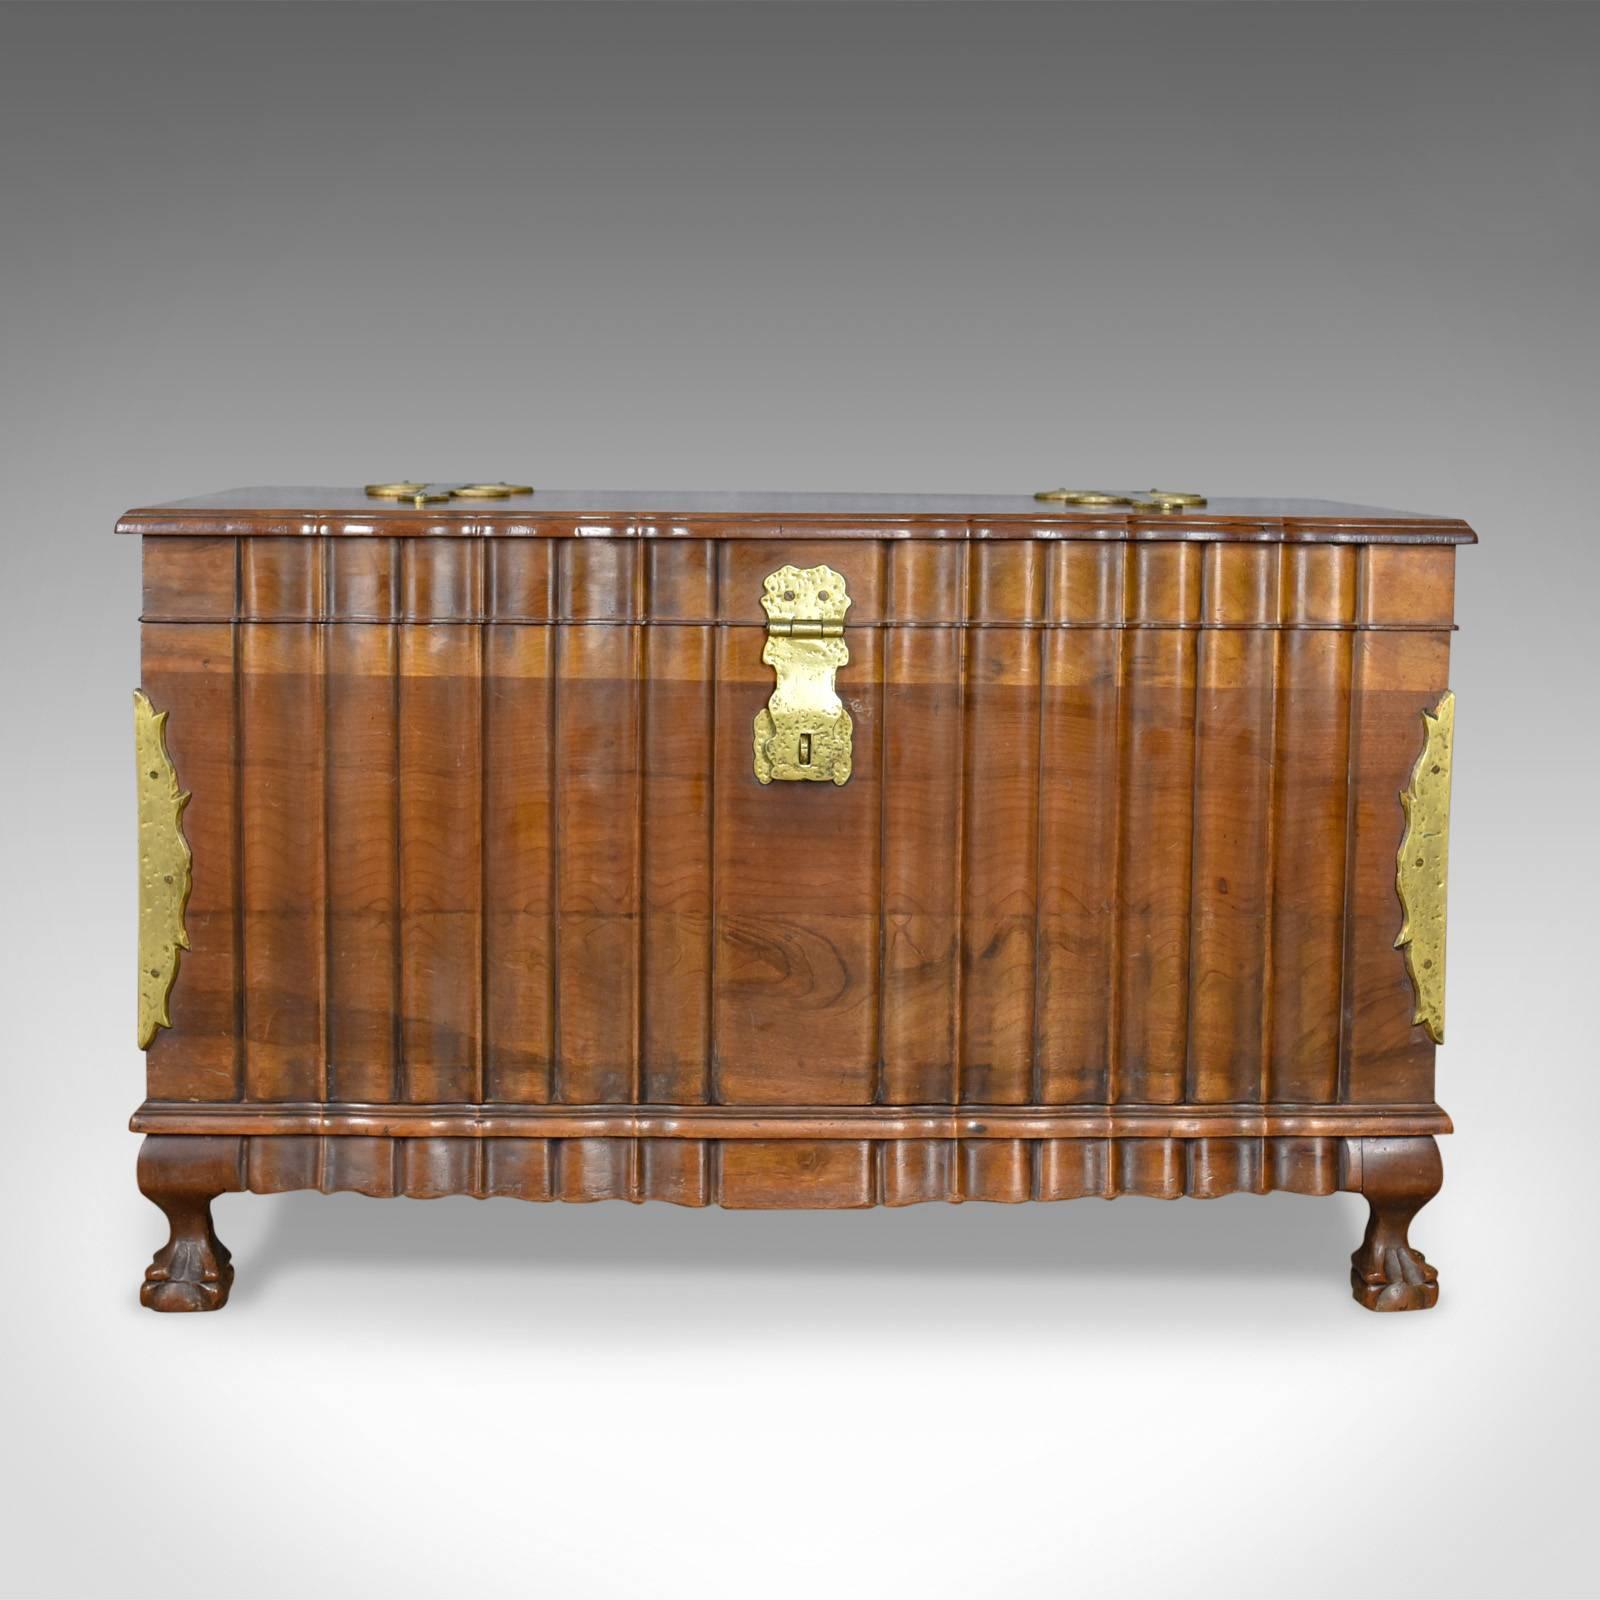 This is an Asian hardwood trunk, a bronzed metal mounted chest or coffer dating to the late 20th century.

Of quality craftsmanship and stock
Attractive variegated grain interest in caramel hues
In rippled form dressed with hammered bronzed